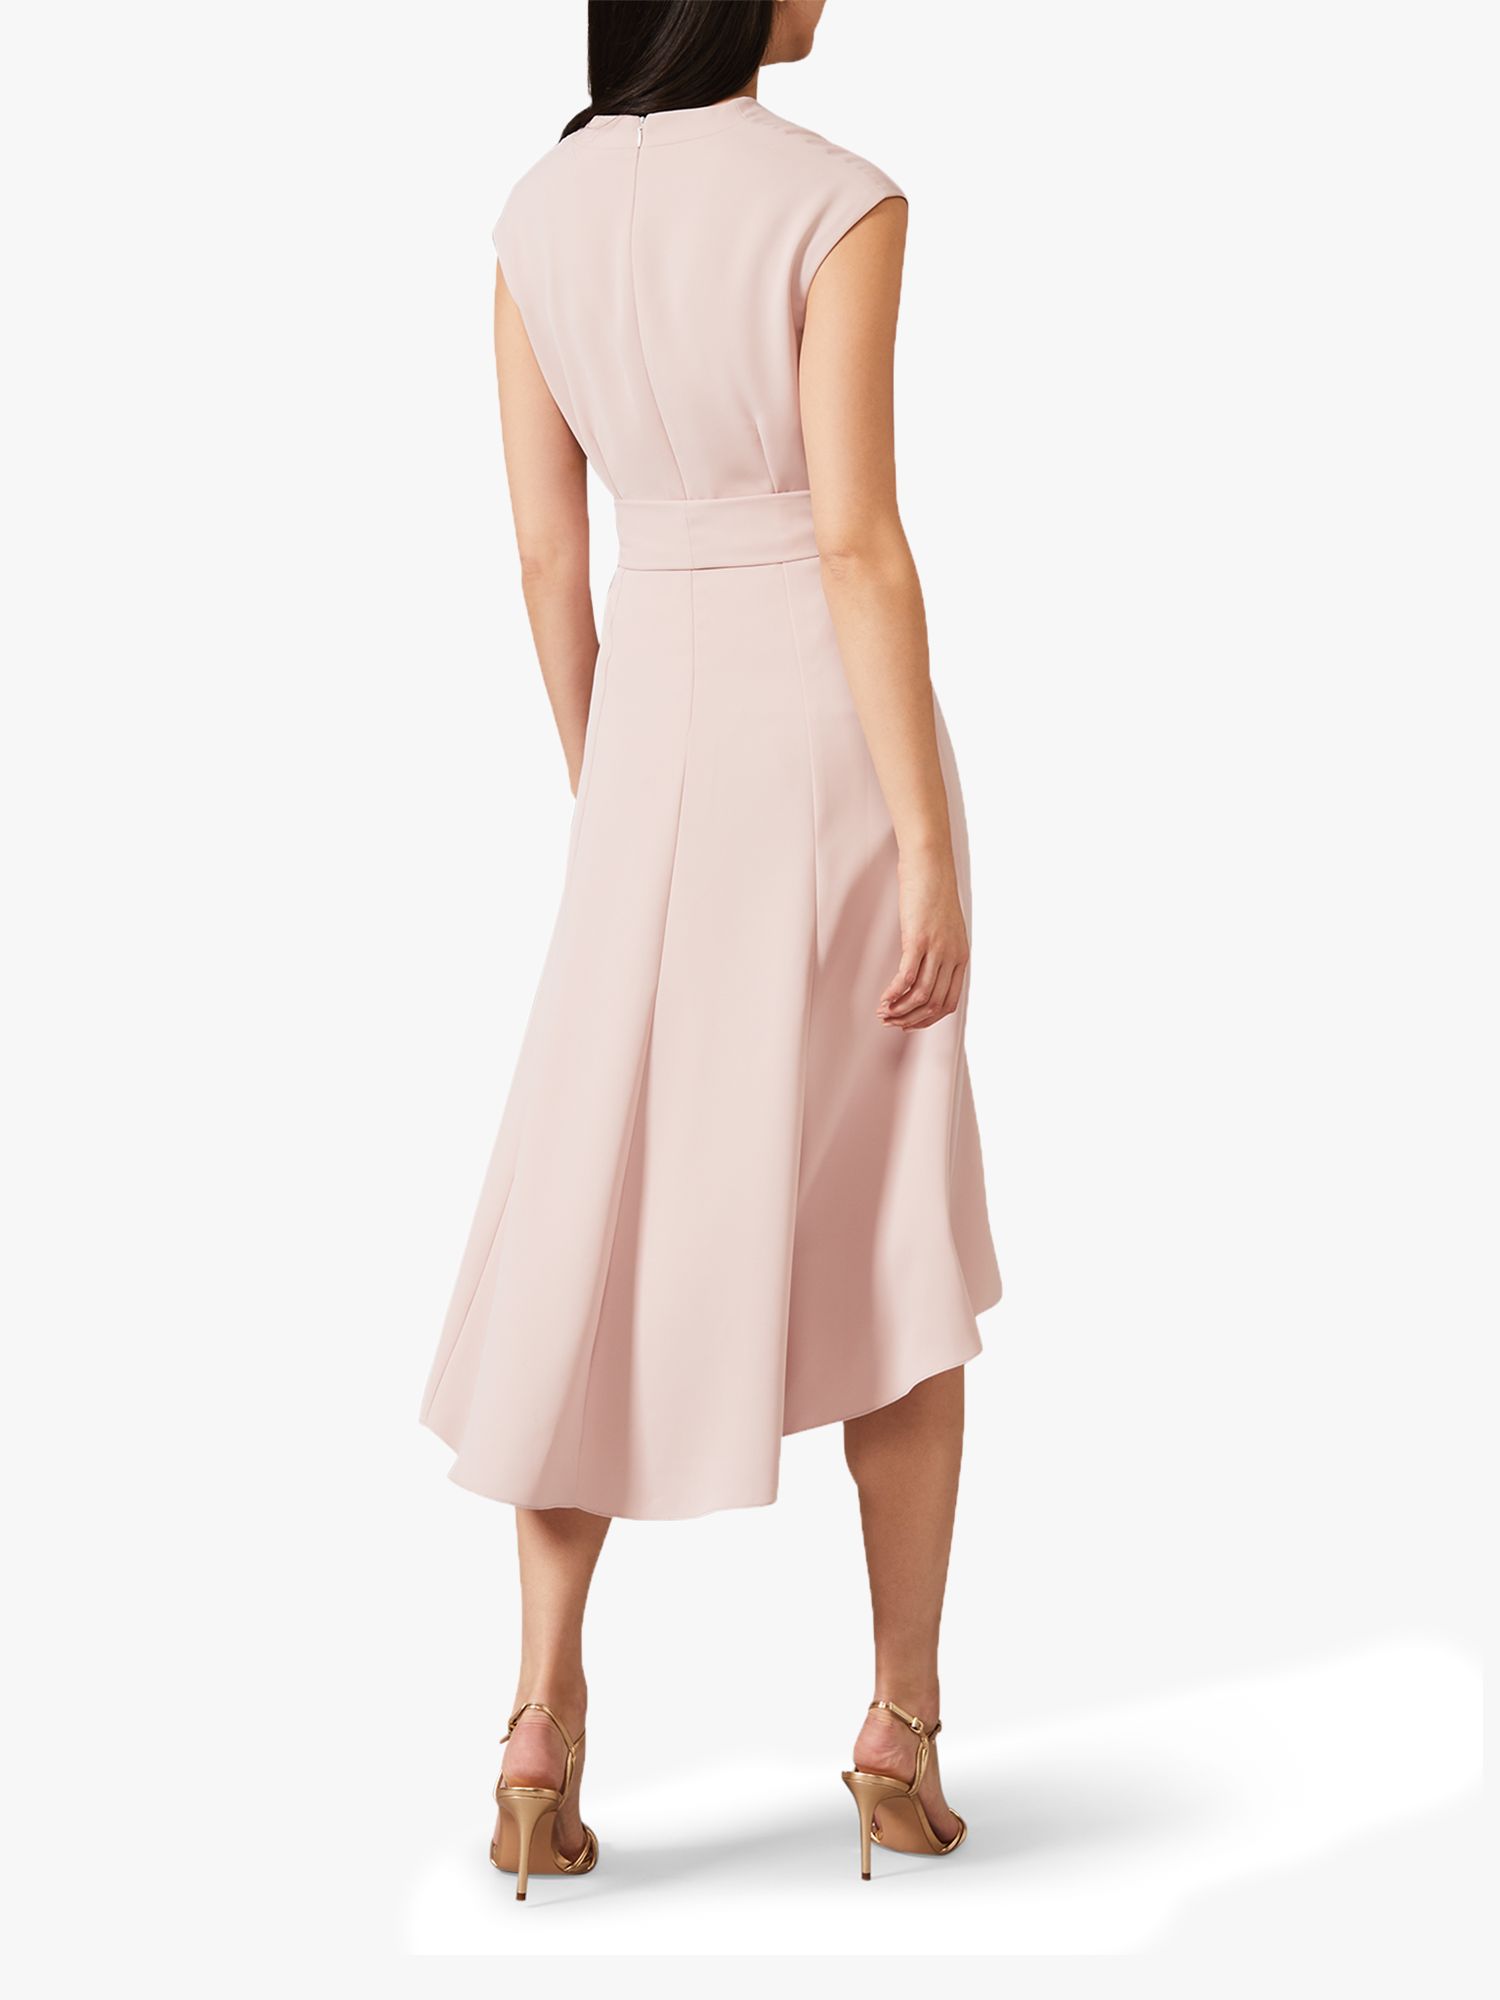 Phase Eight Livvy Dress, Antique Rose at John Lewis & Partners